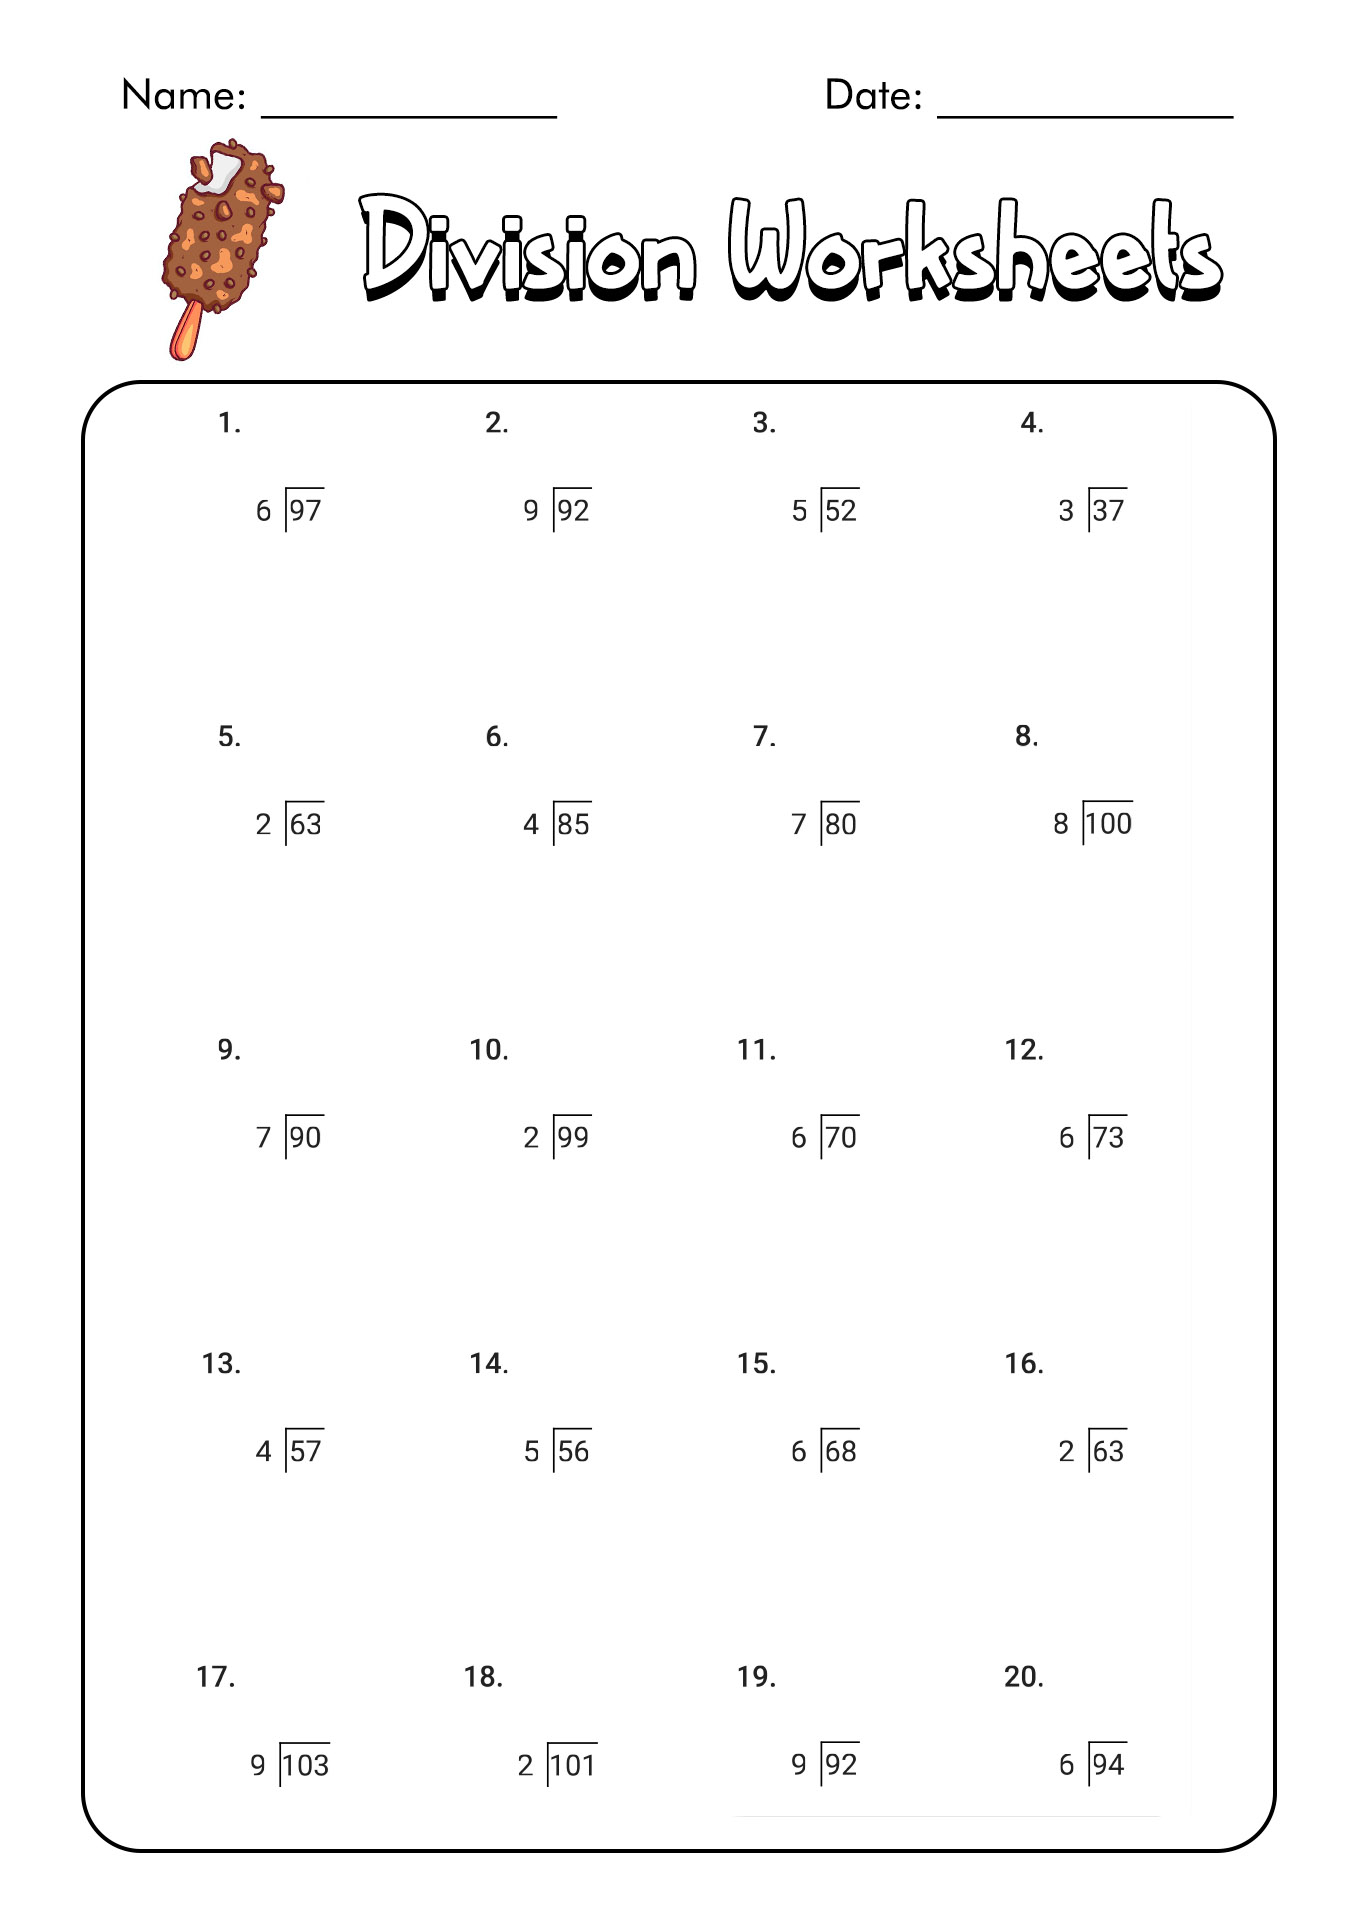 13-best-images-of-division-by-2-and-3-worksheets-divide-by-2-worksheets-3-by-2-digit-division